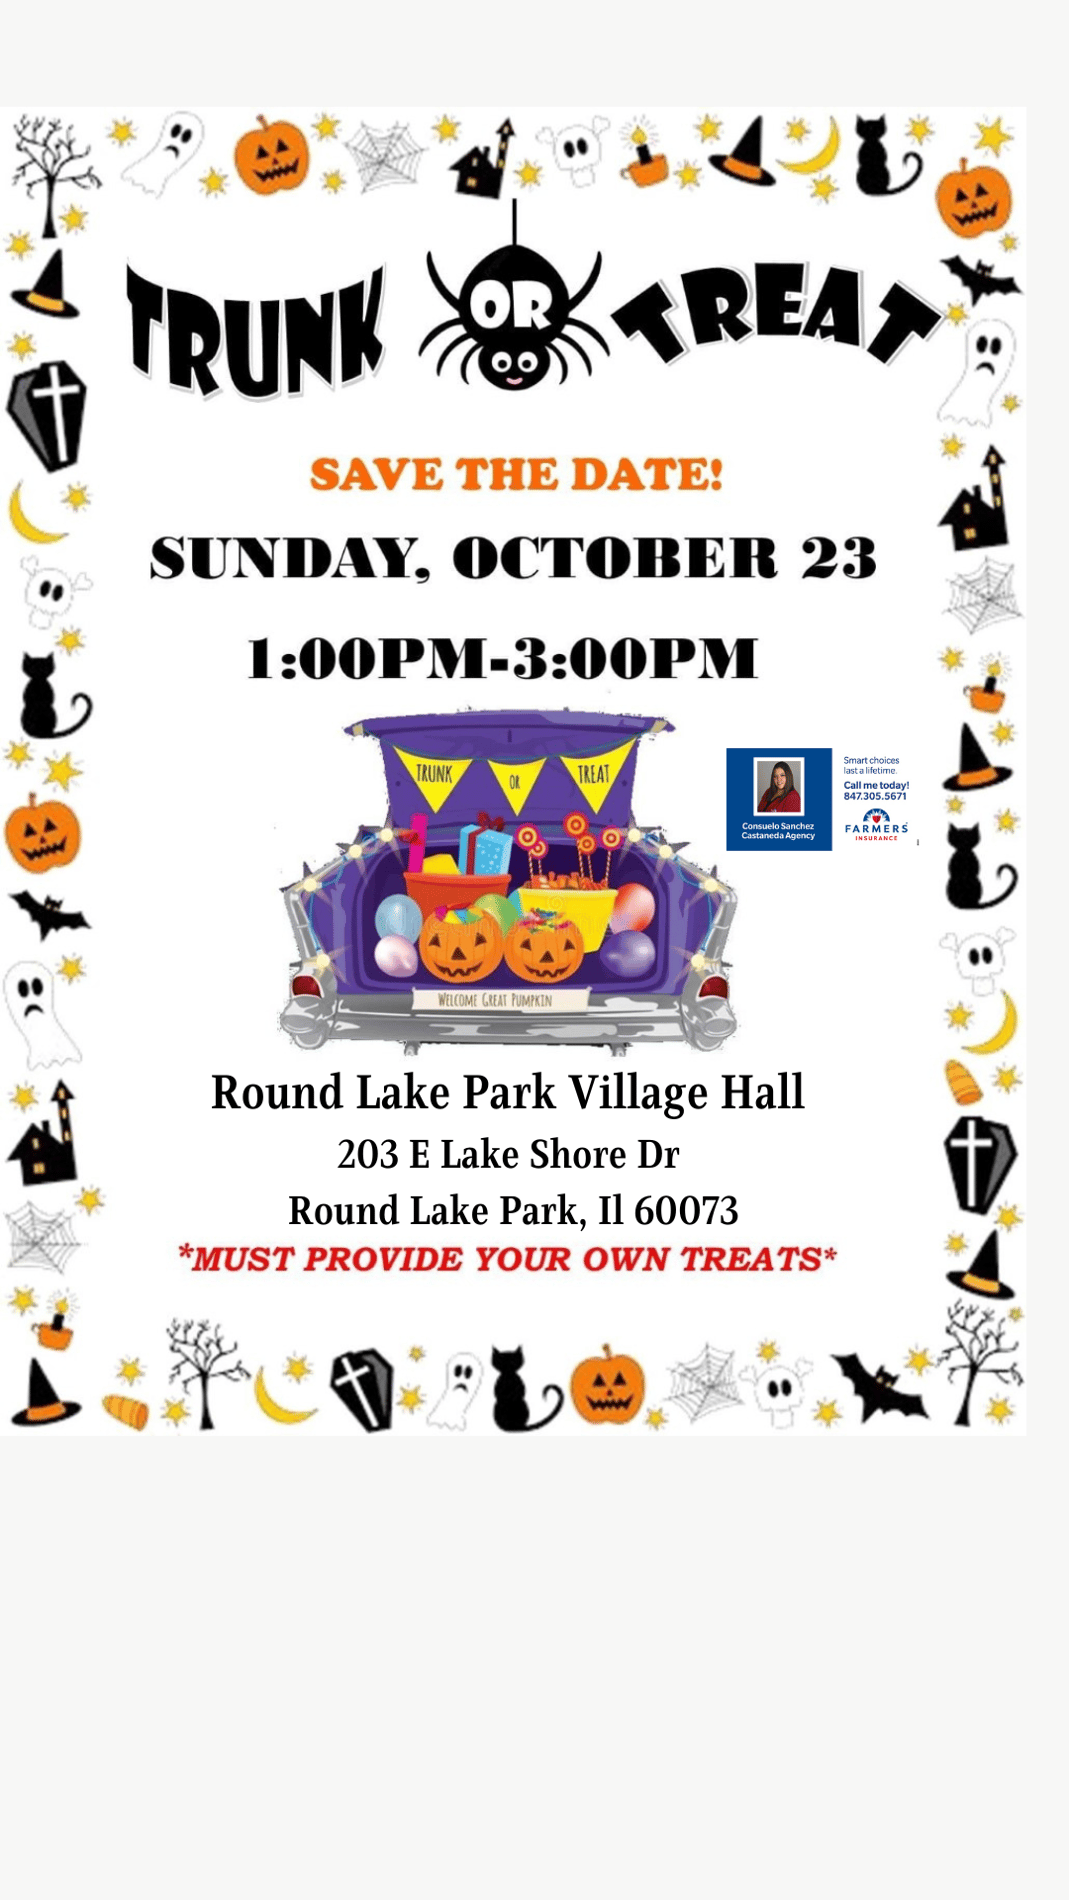 Trunk or Treat at The Village of Round Lake Park